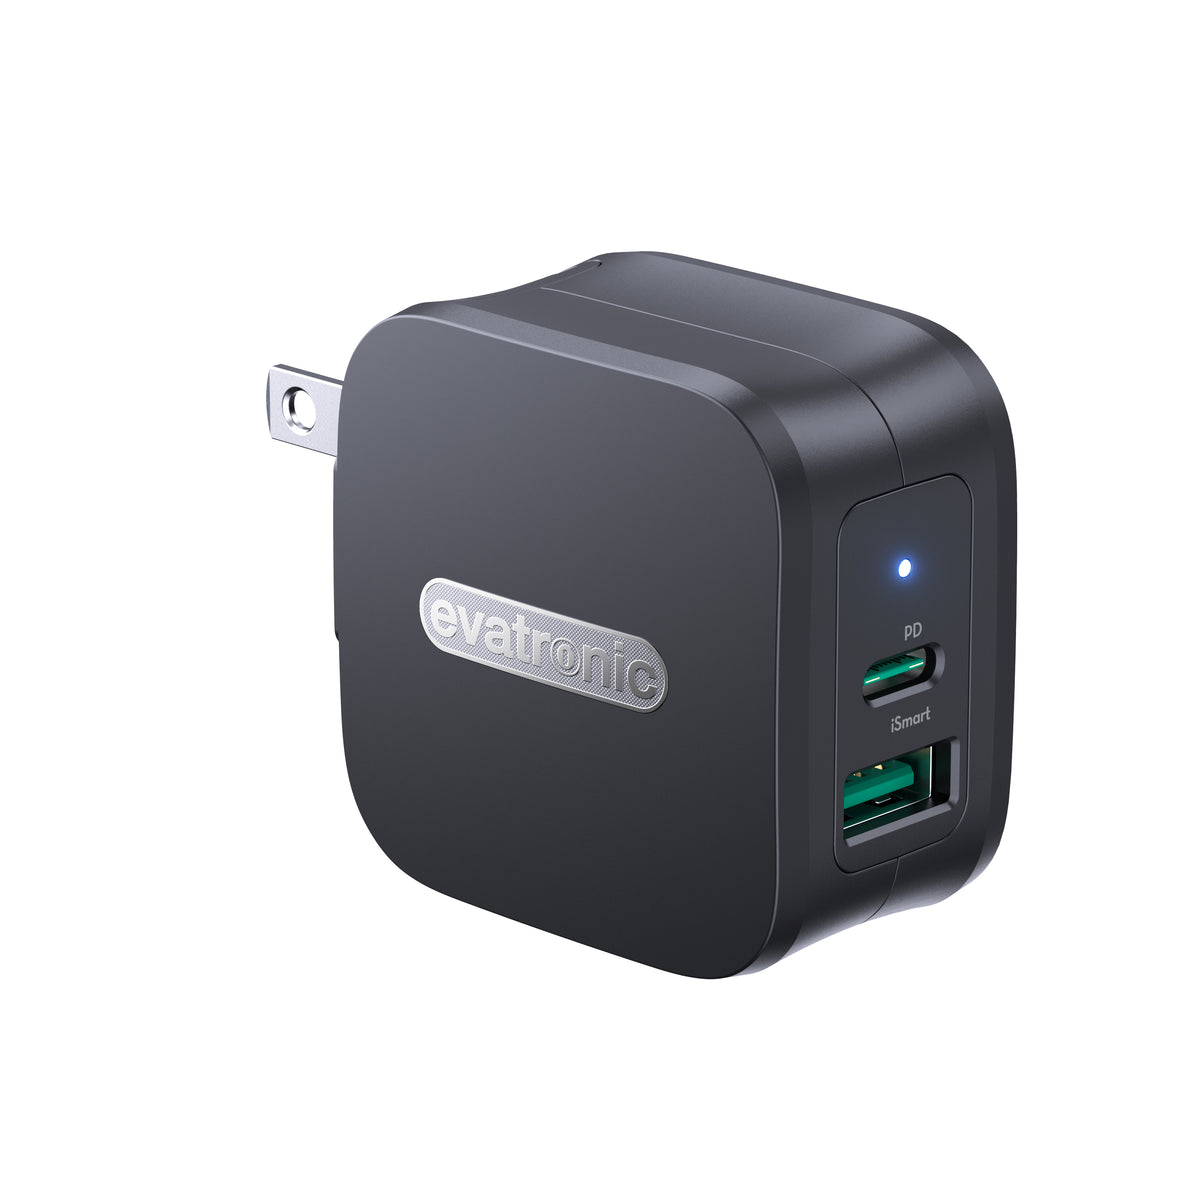 axGear Chargeur USB, Station de charge USB RAVPower 60W 12A 6